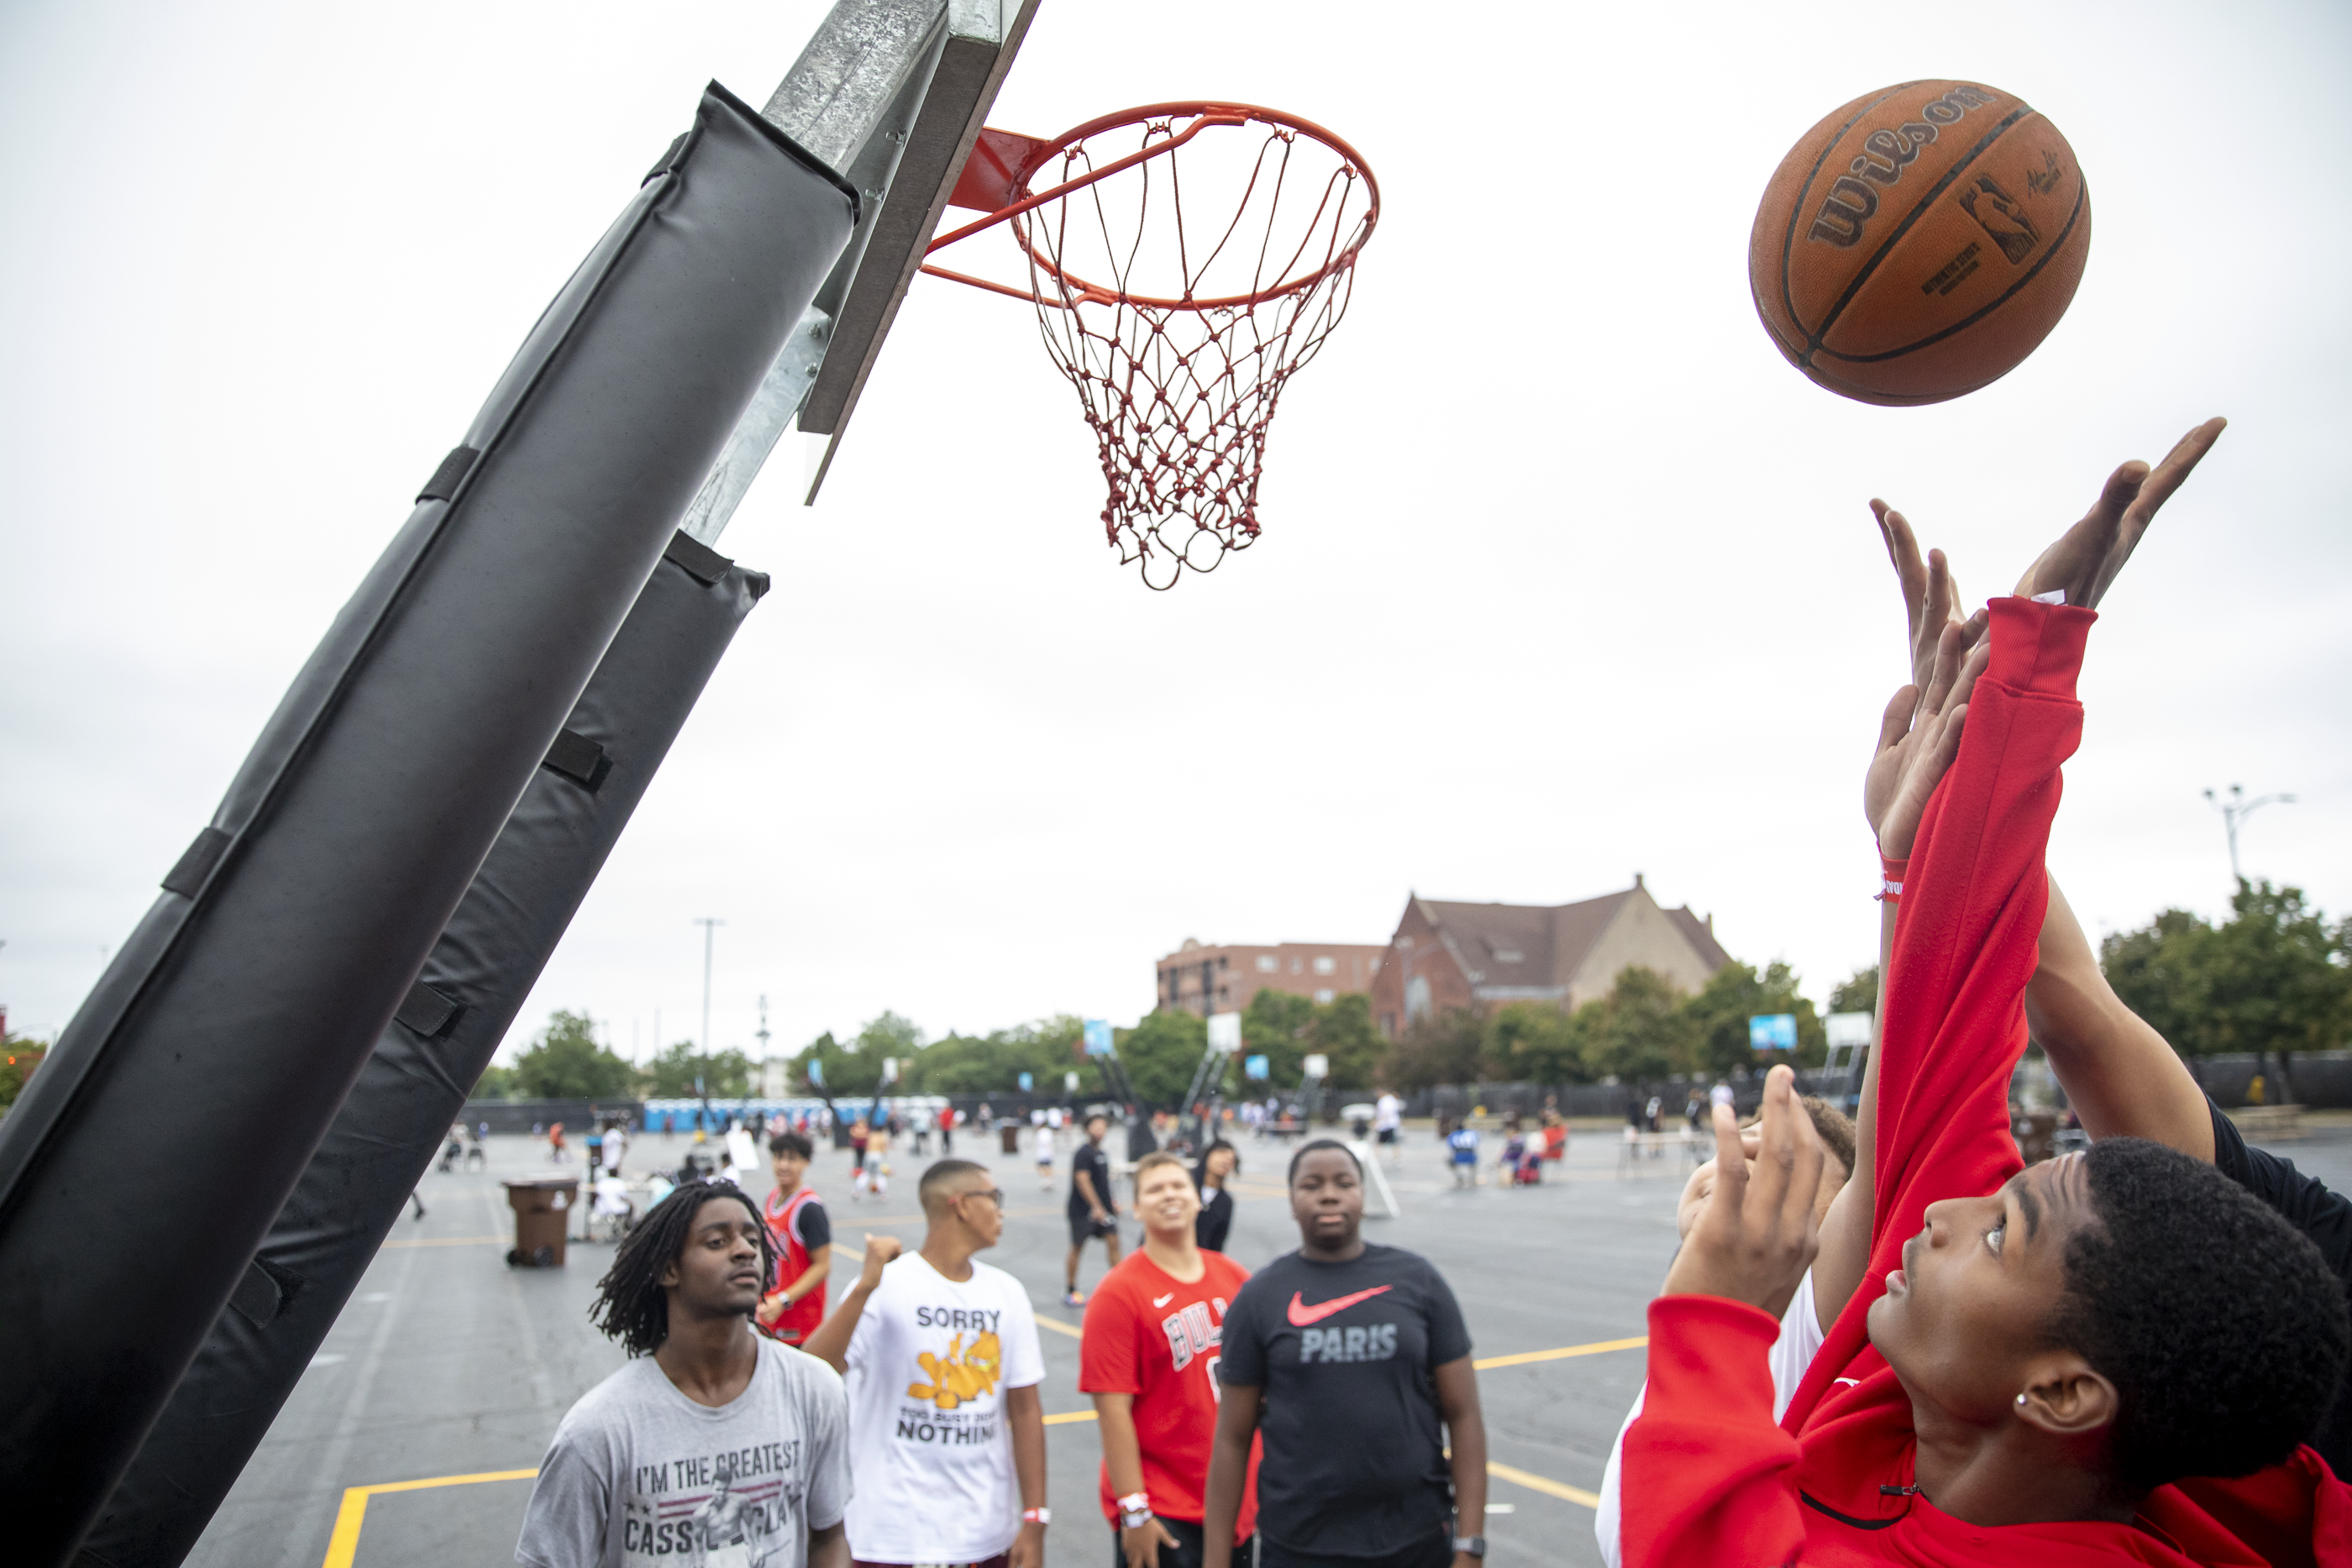 Check out photos from the first-ever Bulls Fest in Chicago